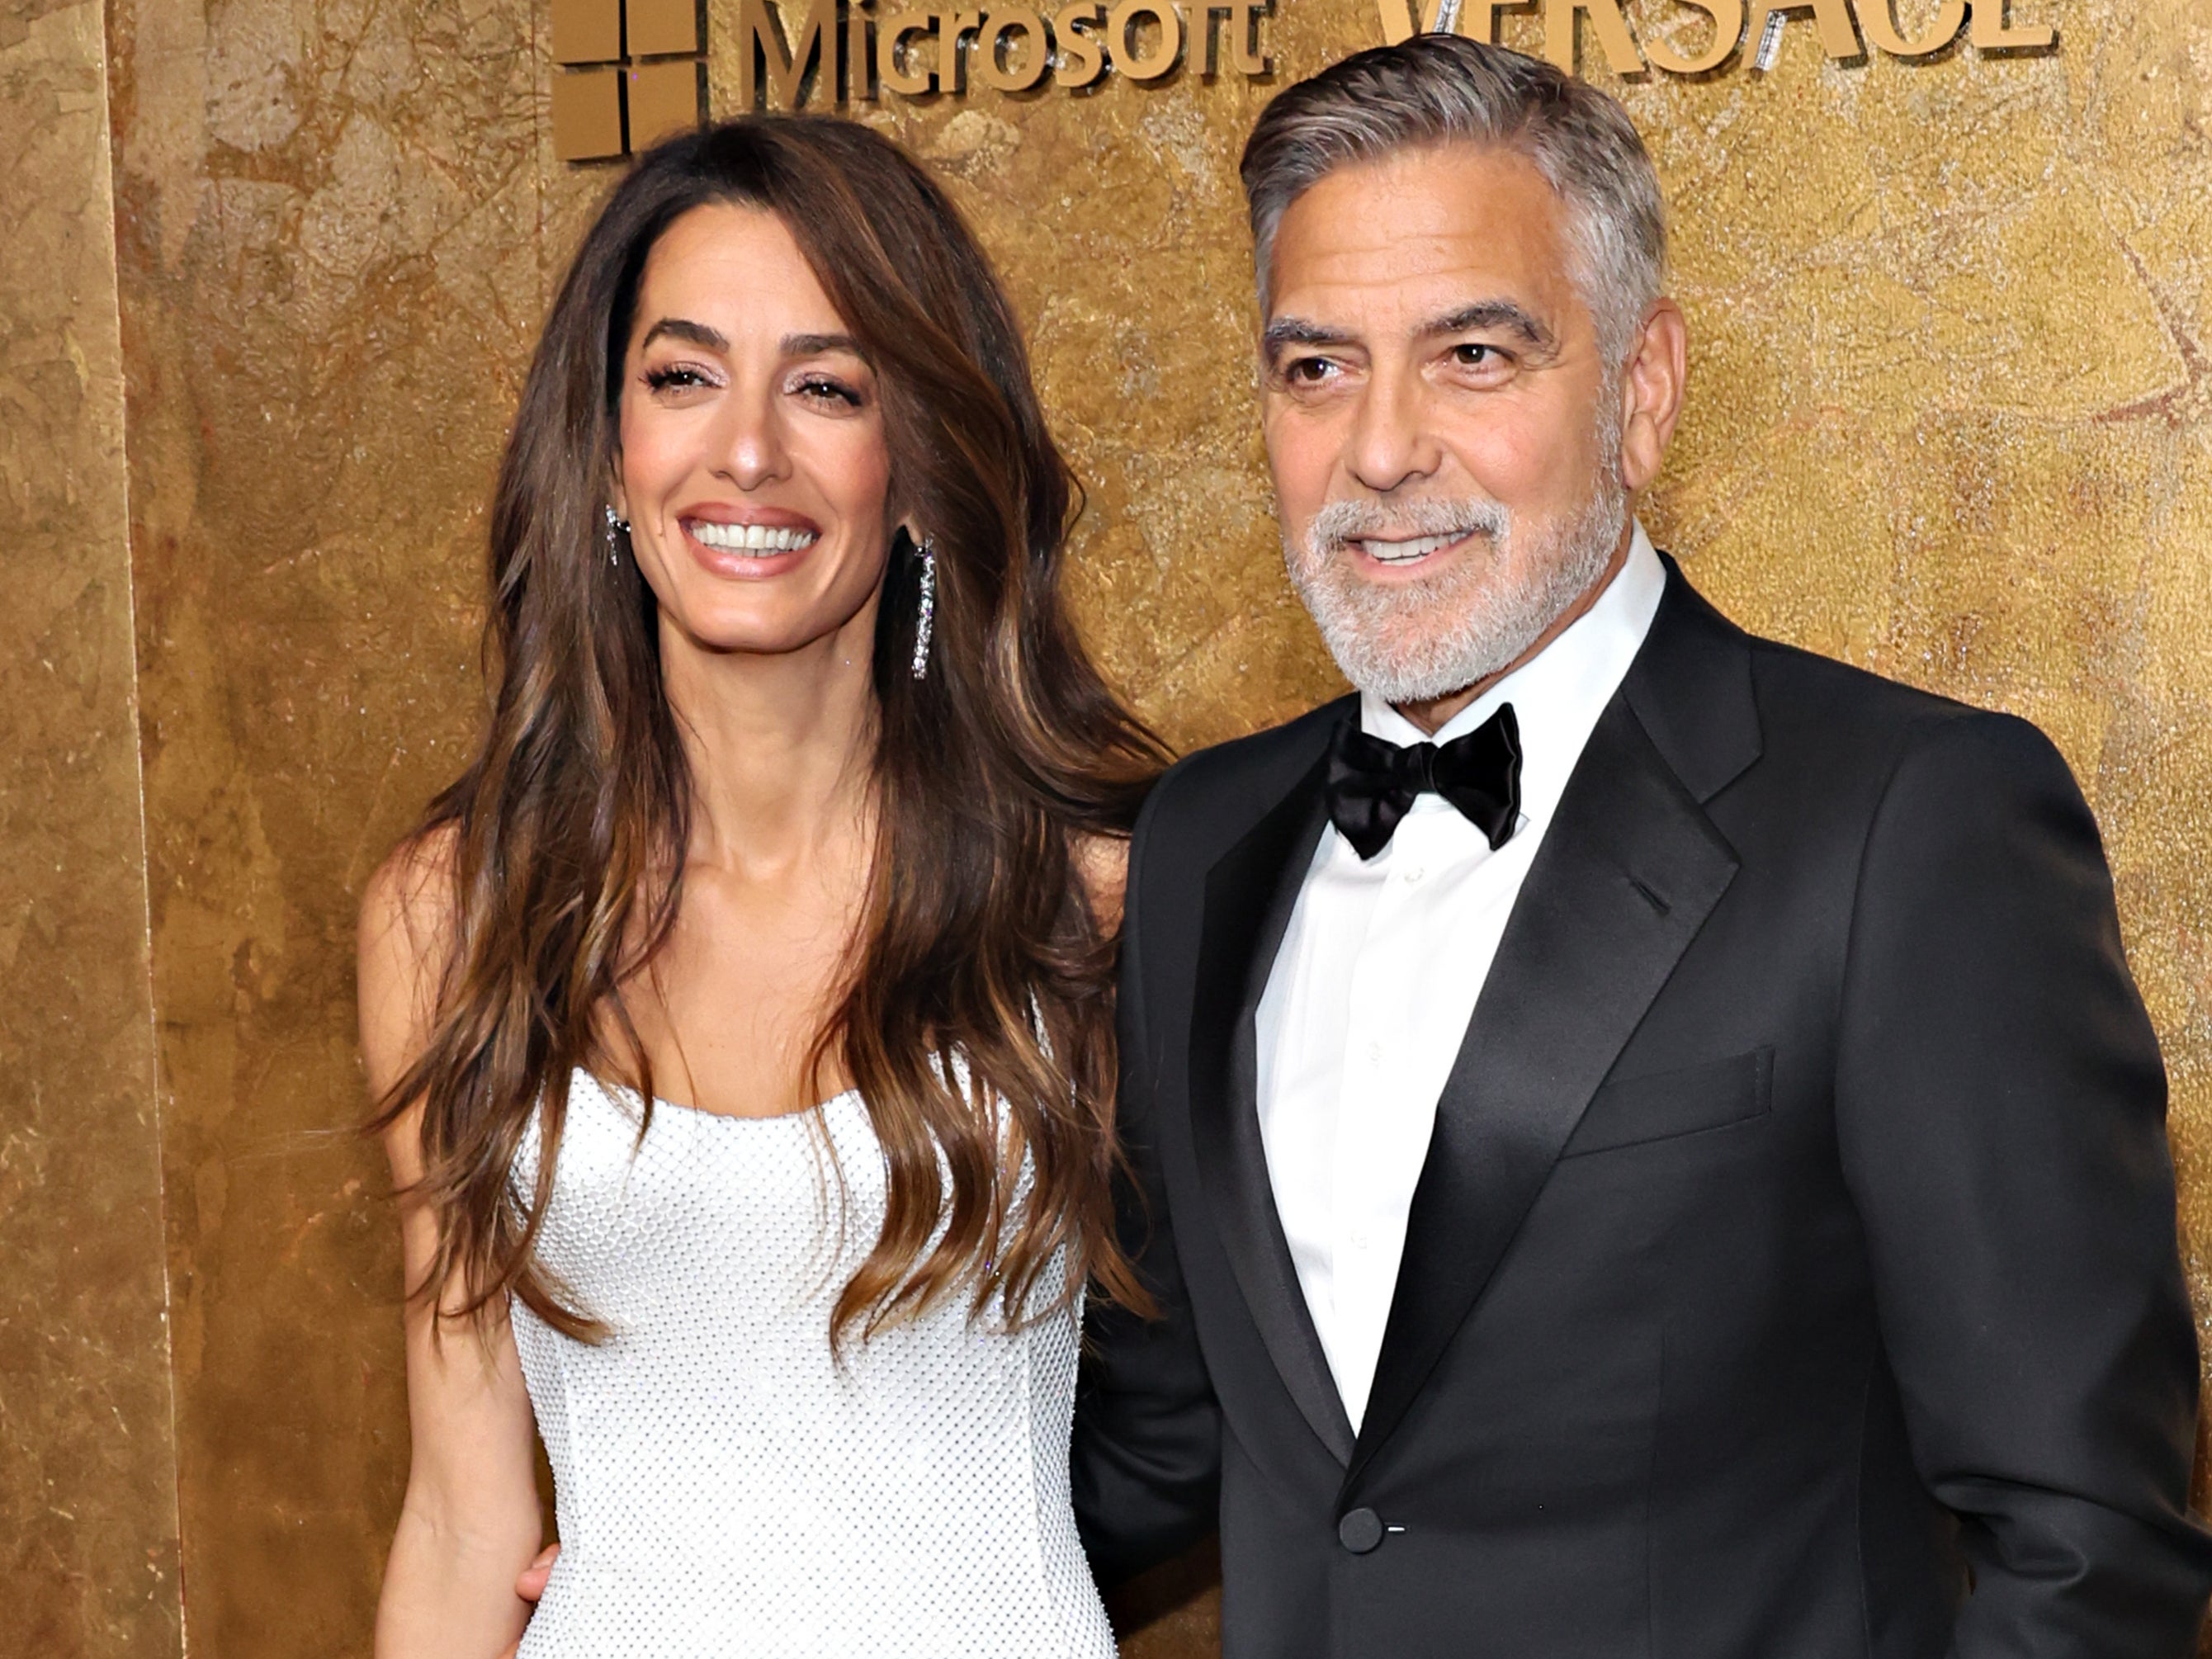 George Clooney, who has been open about his health woes, with his wife Amal